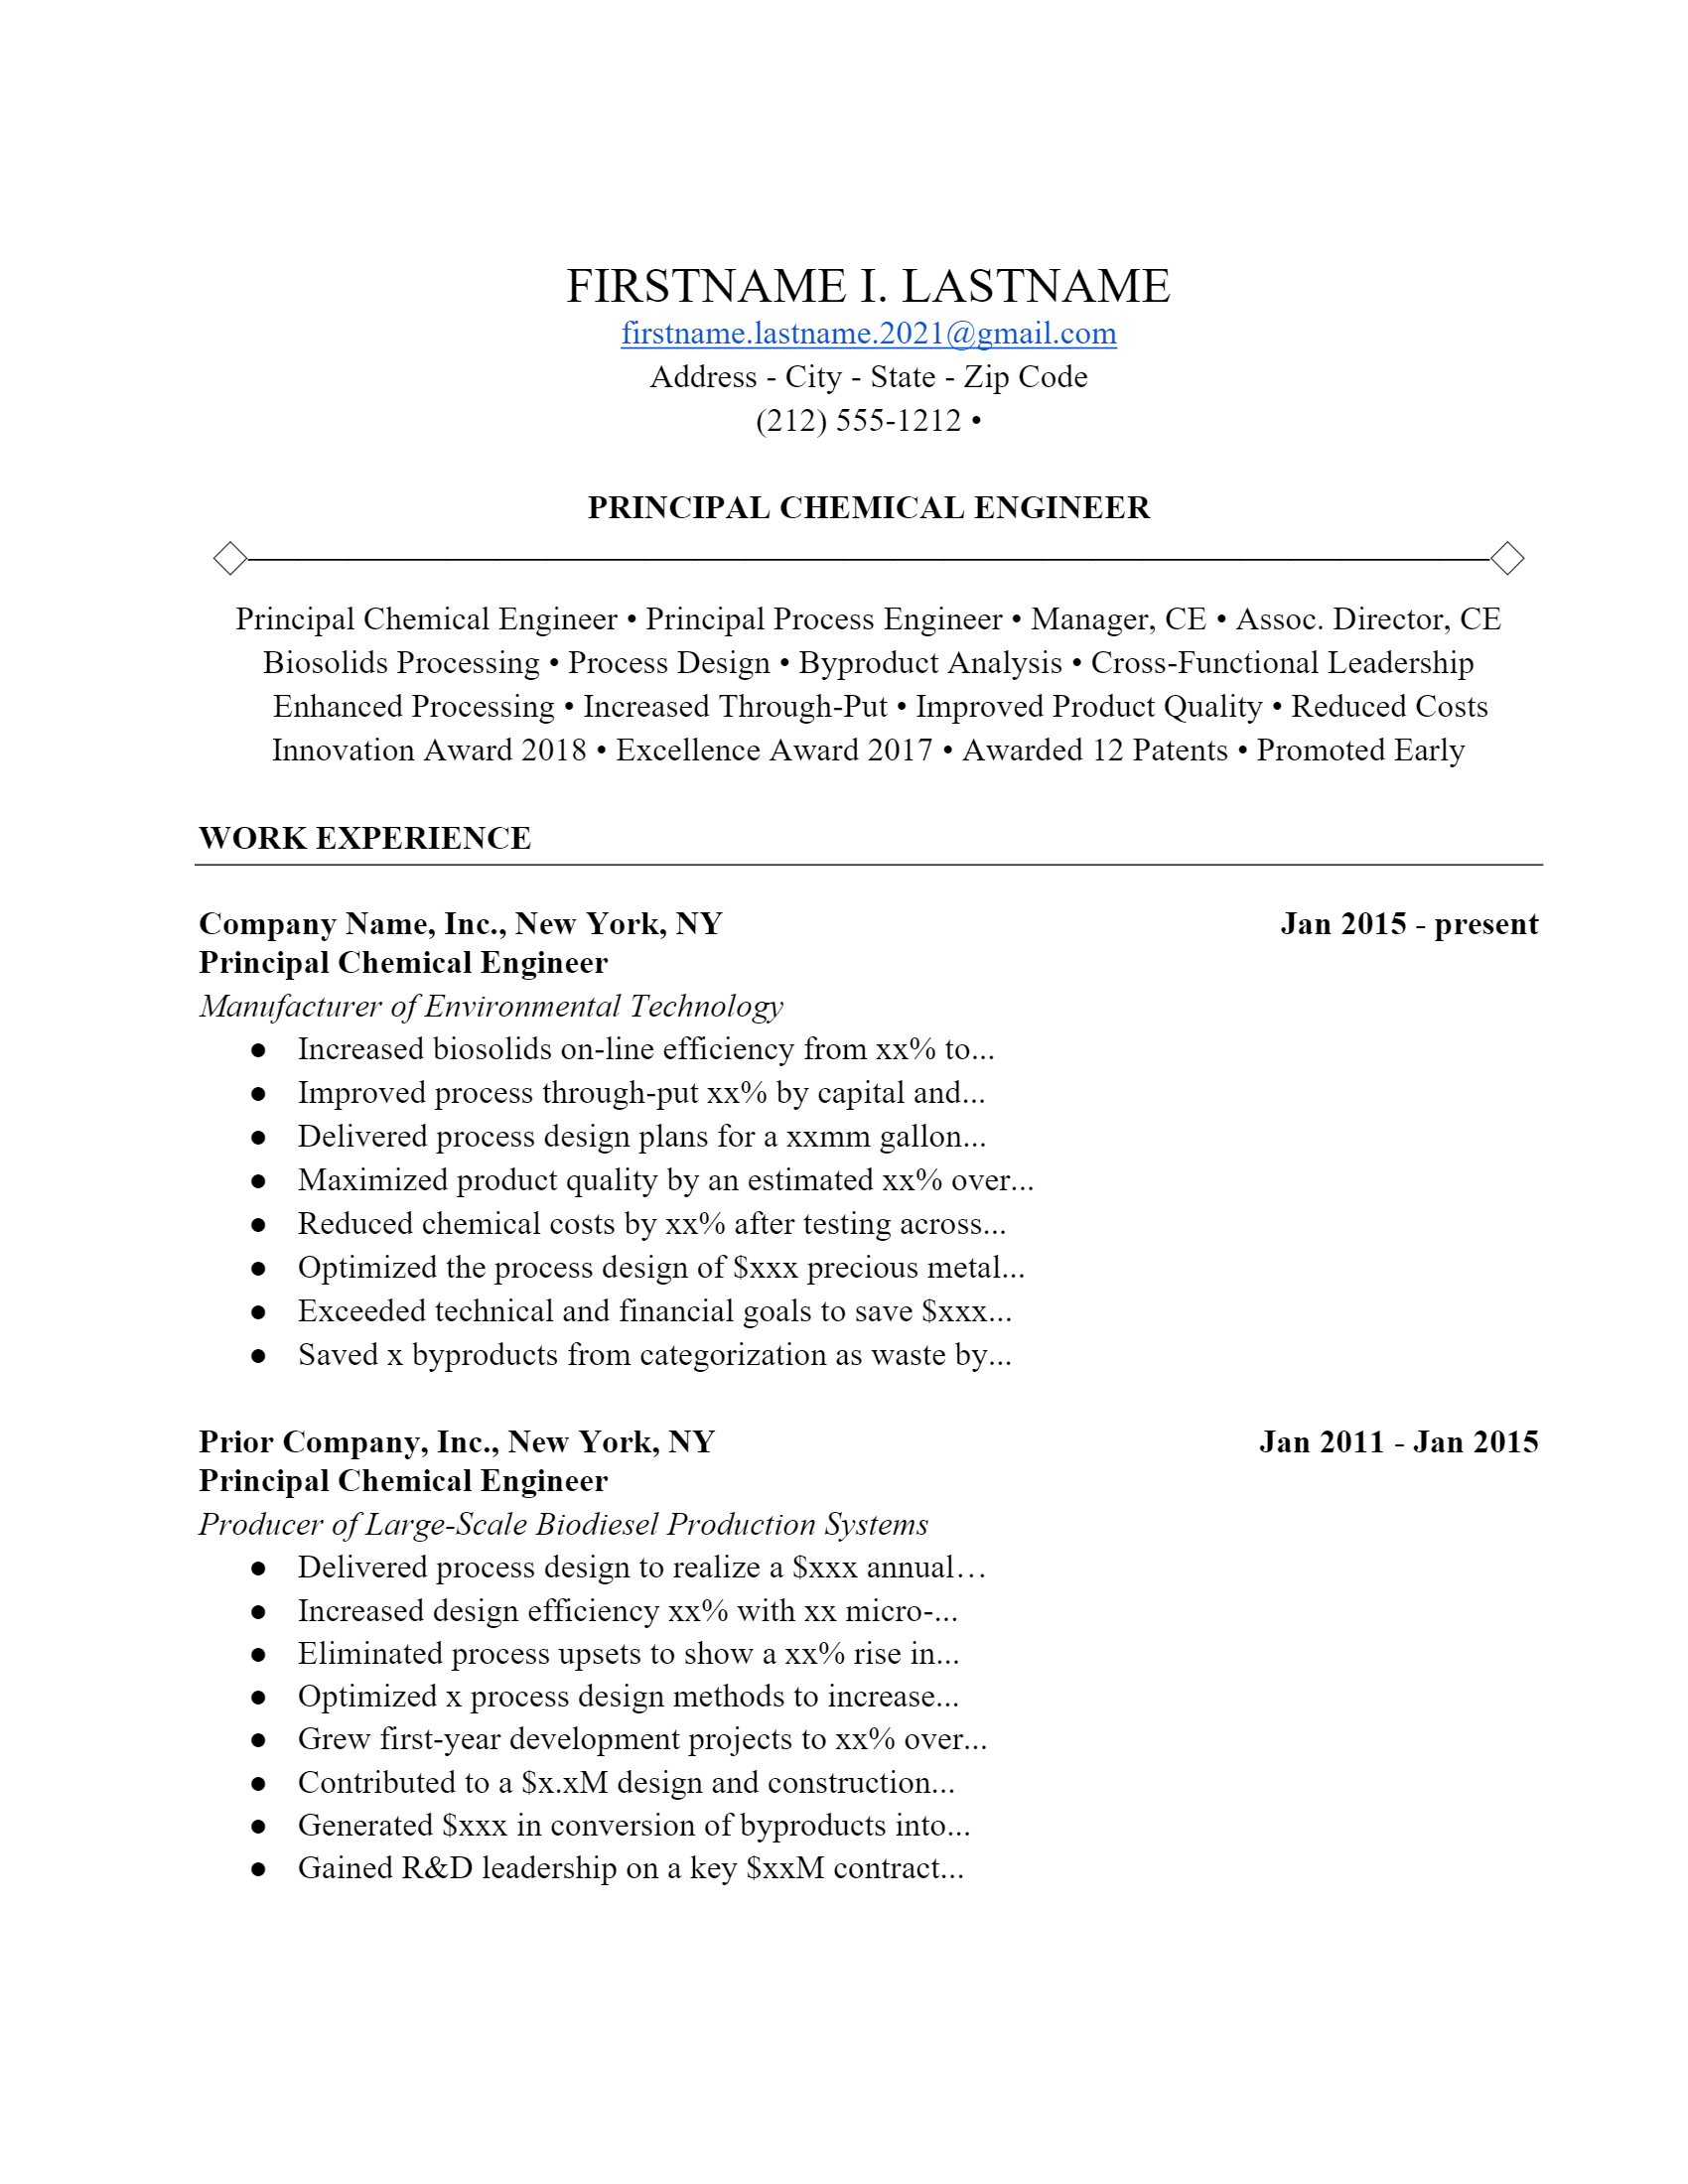 Chemical Engineer Resume .Docx (Word)